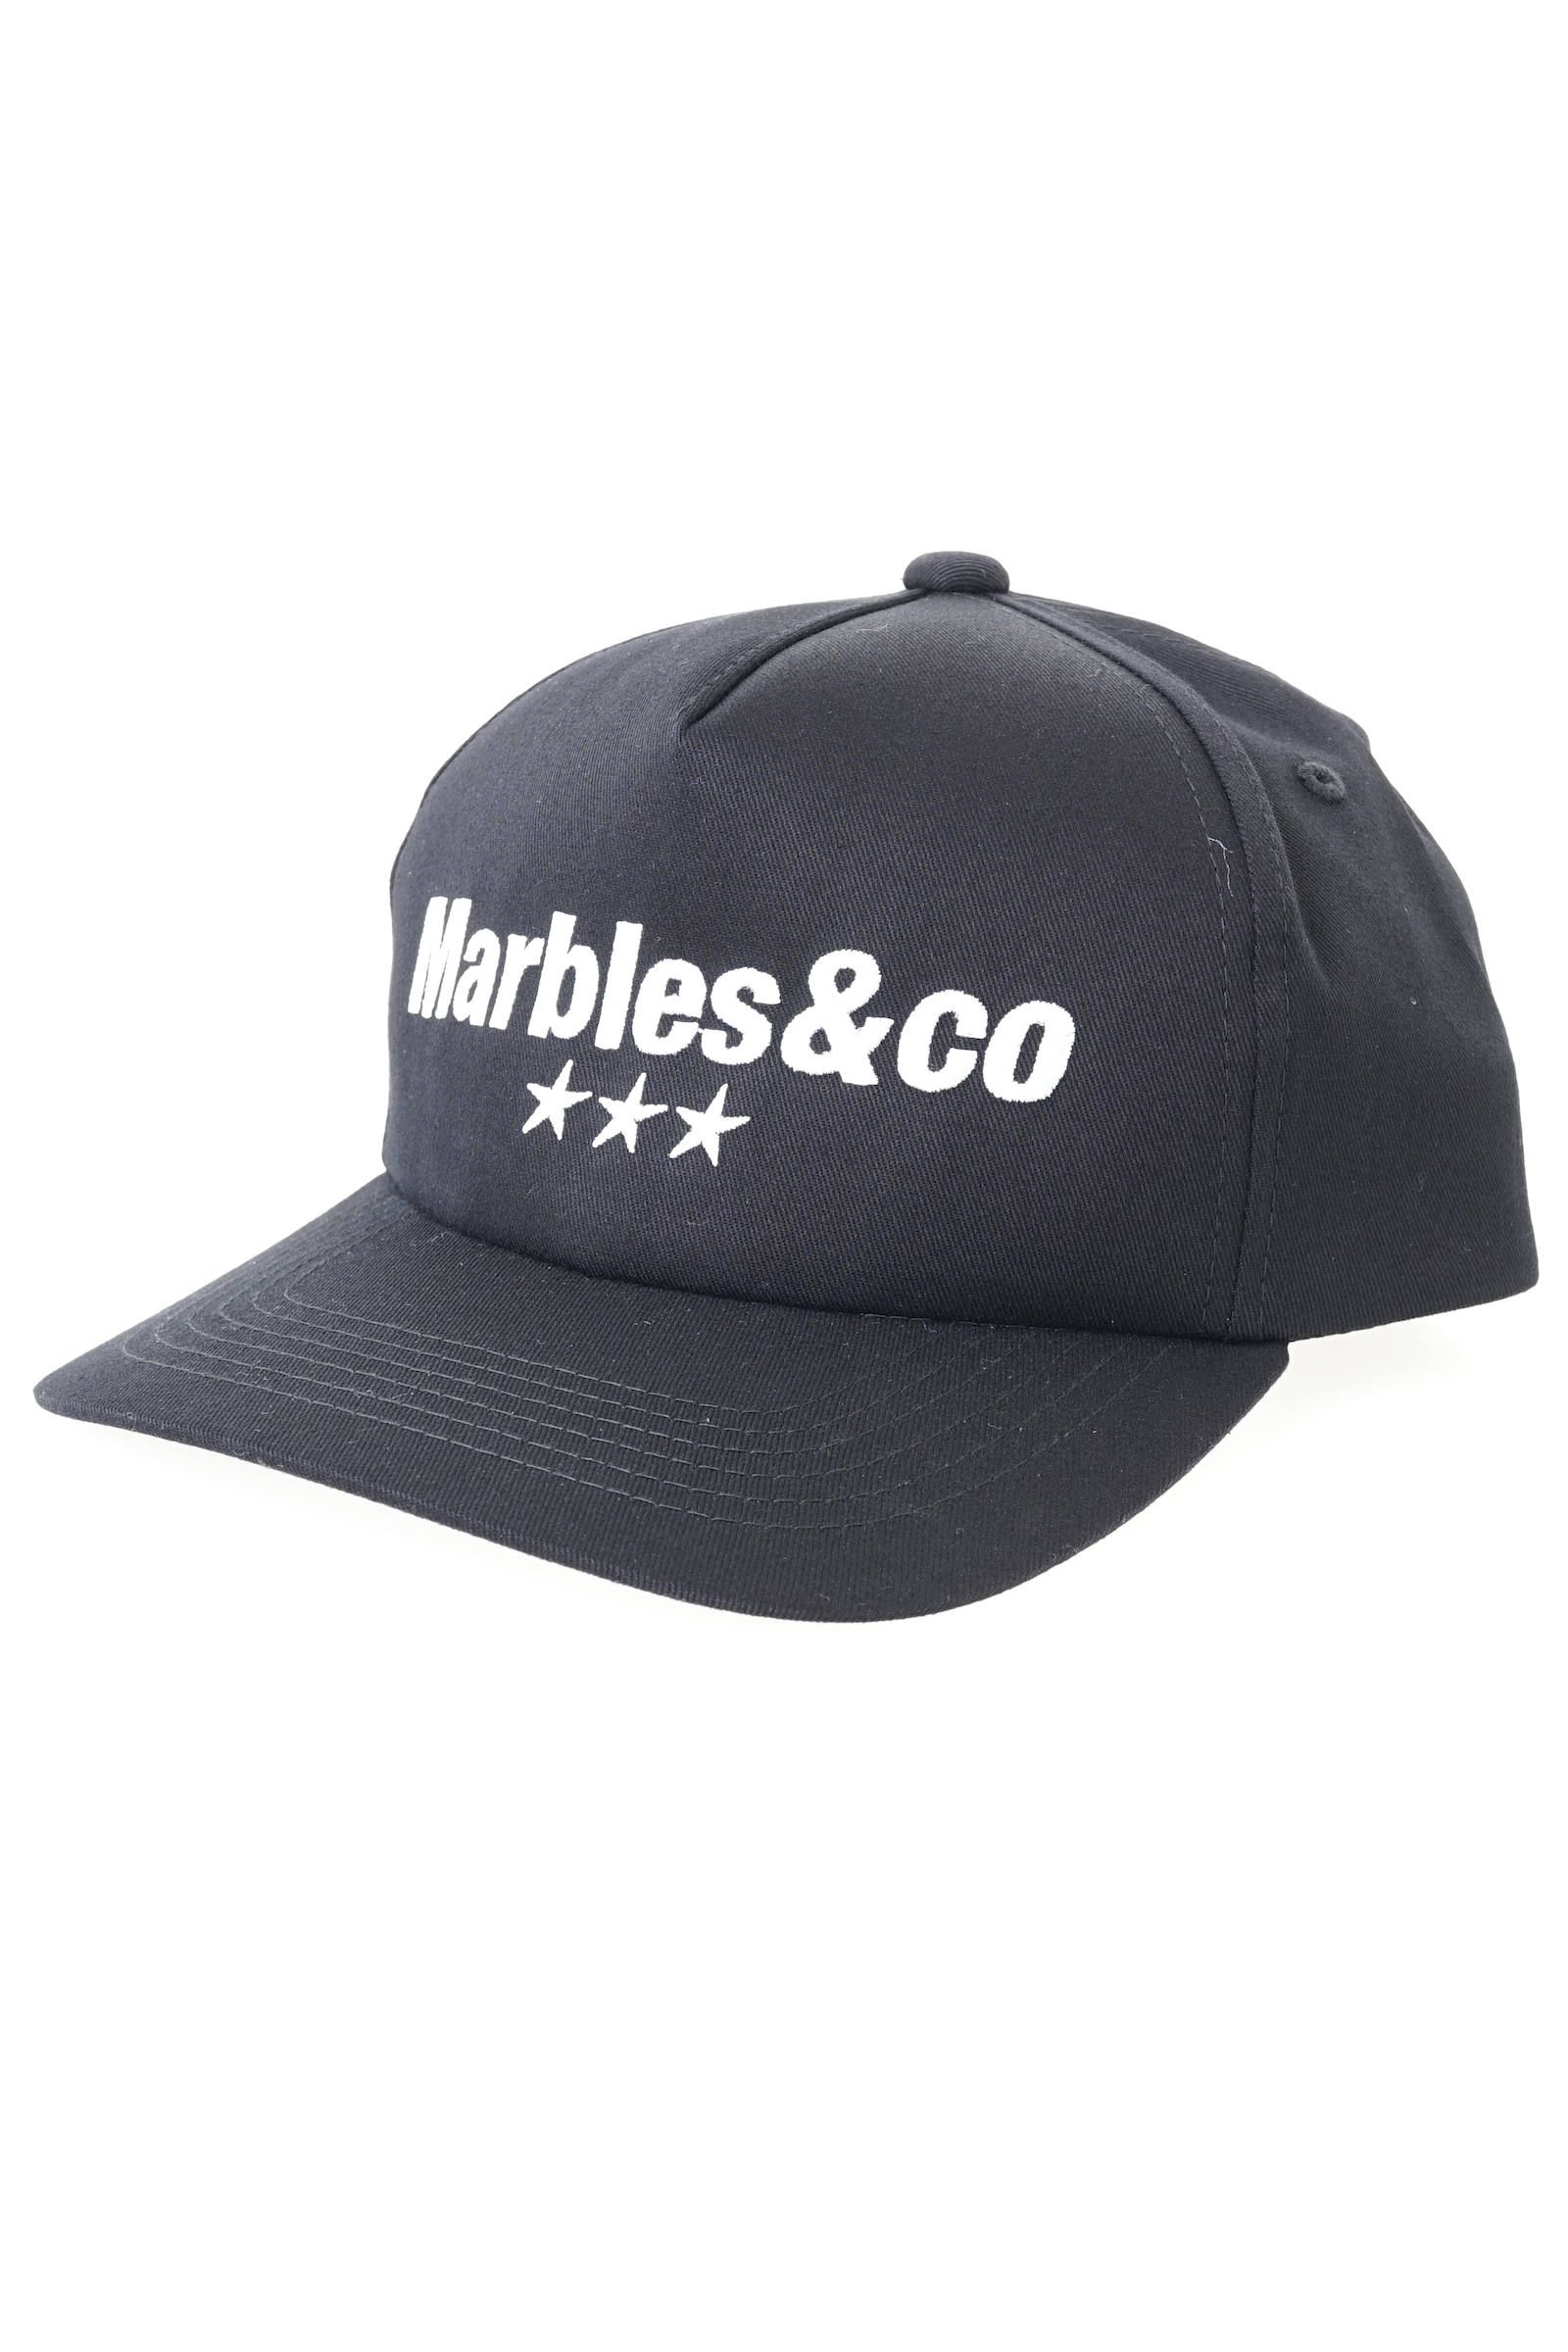 Marbles - 【即日発送可能!】5Panel Cap Marbles&co | Ivory